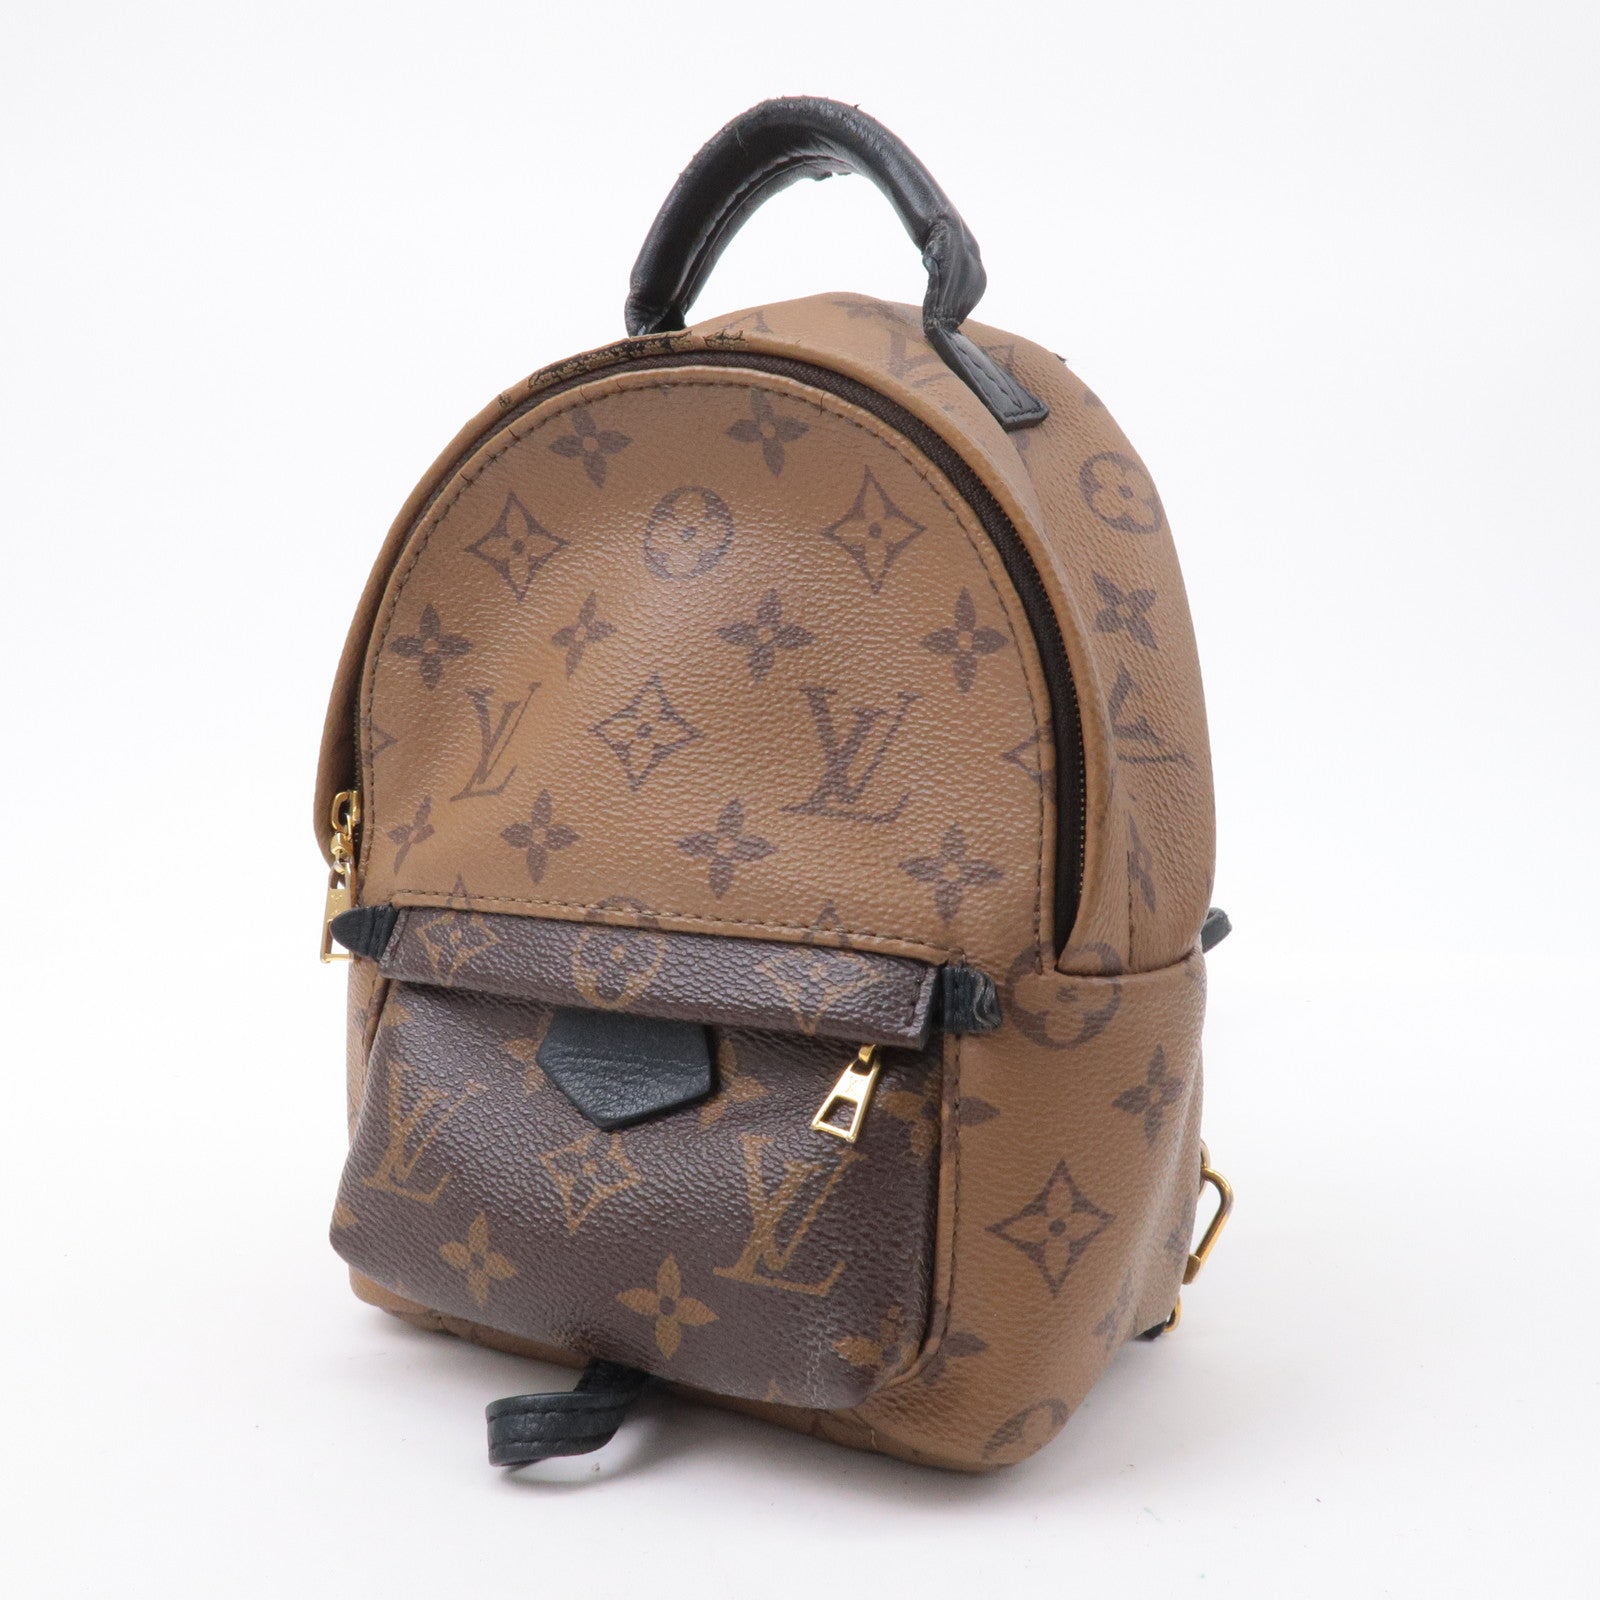 LOUIS VUITTON, REVIEW FRIDAY, What Fits Inside, Palm Springs Mini, Reverse Monogram